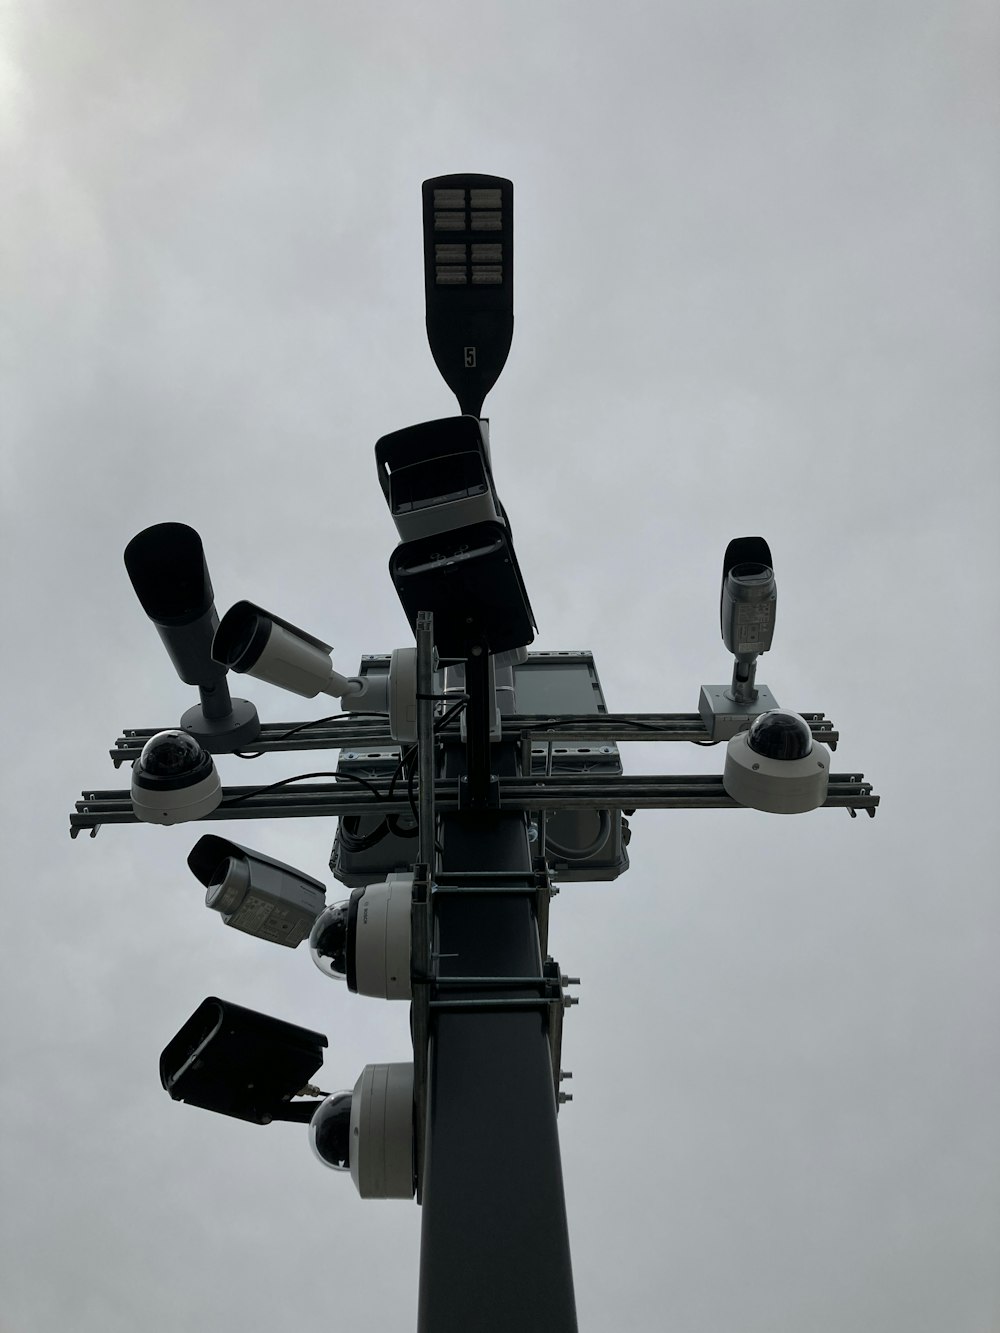 a traffic light with multiple cameras attached to it